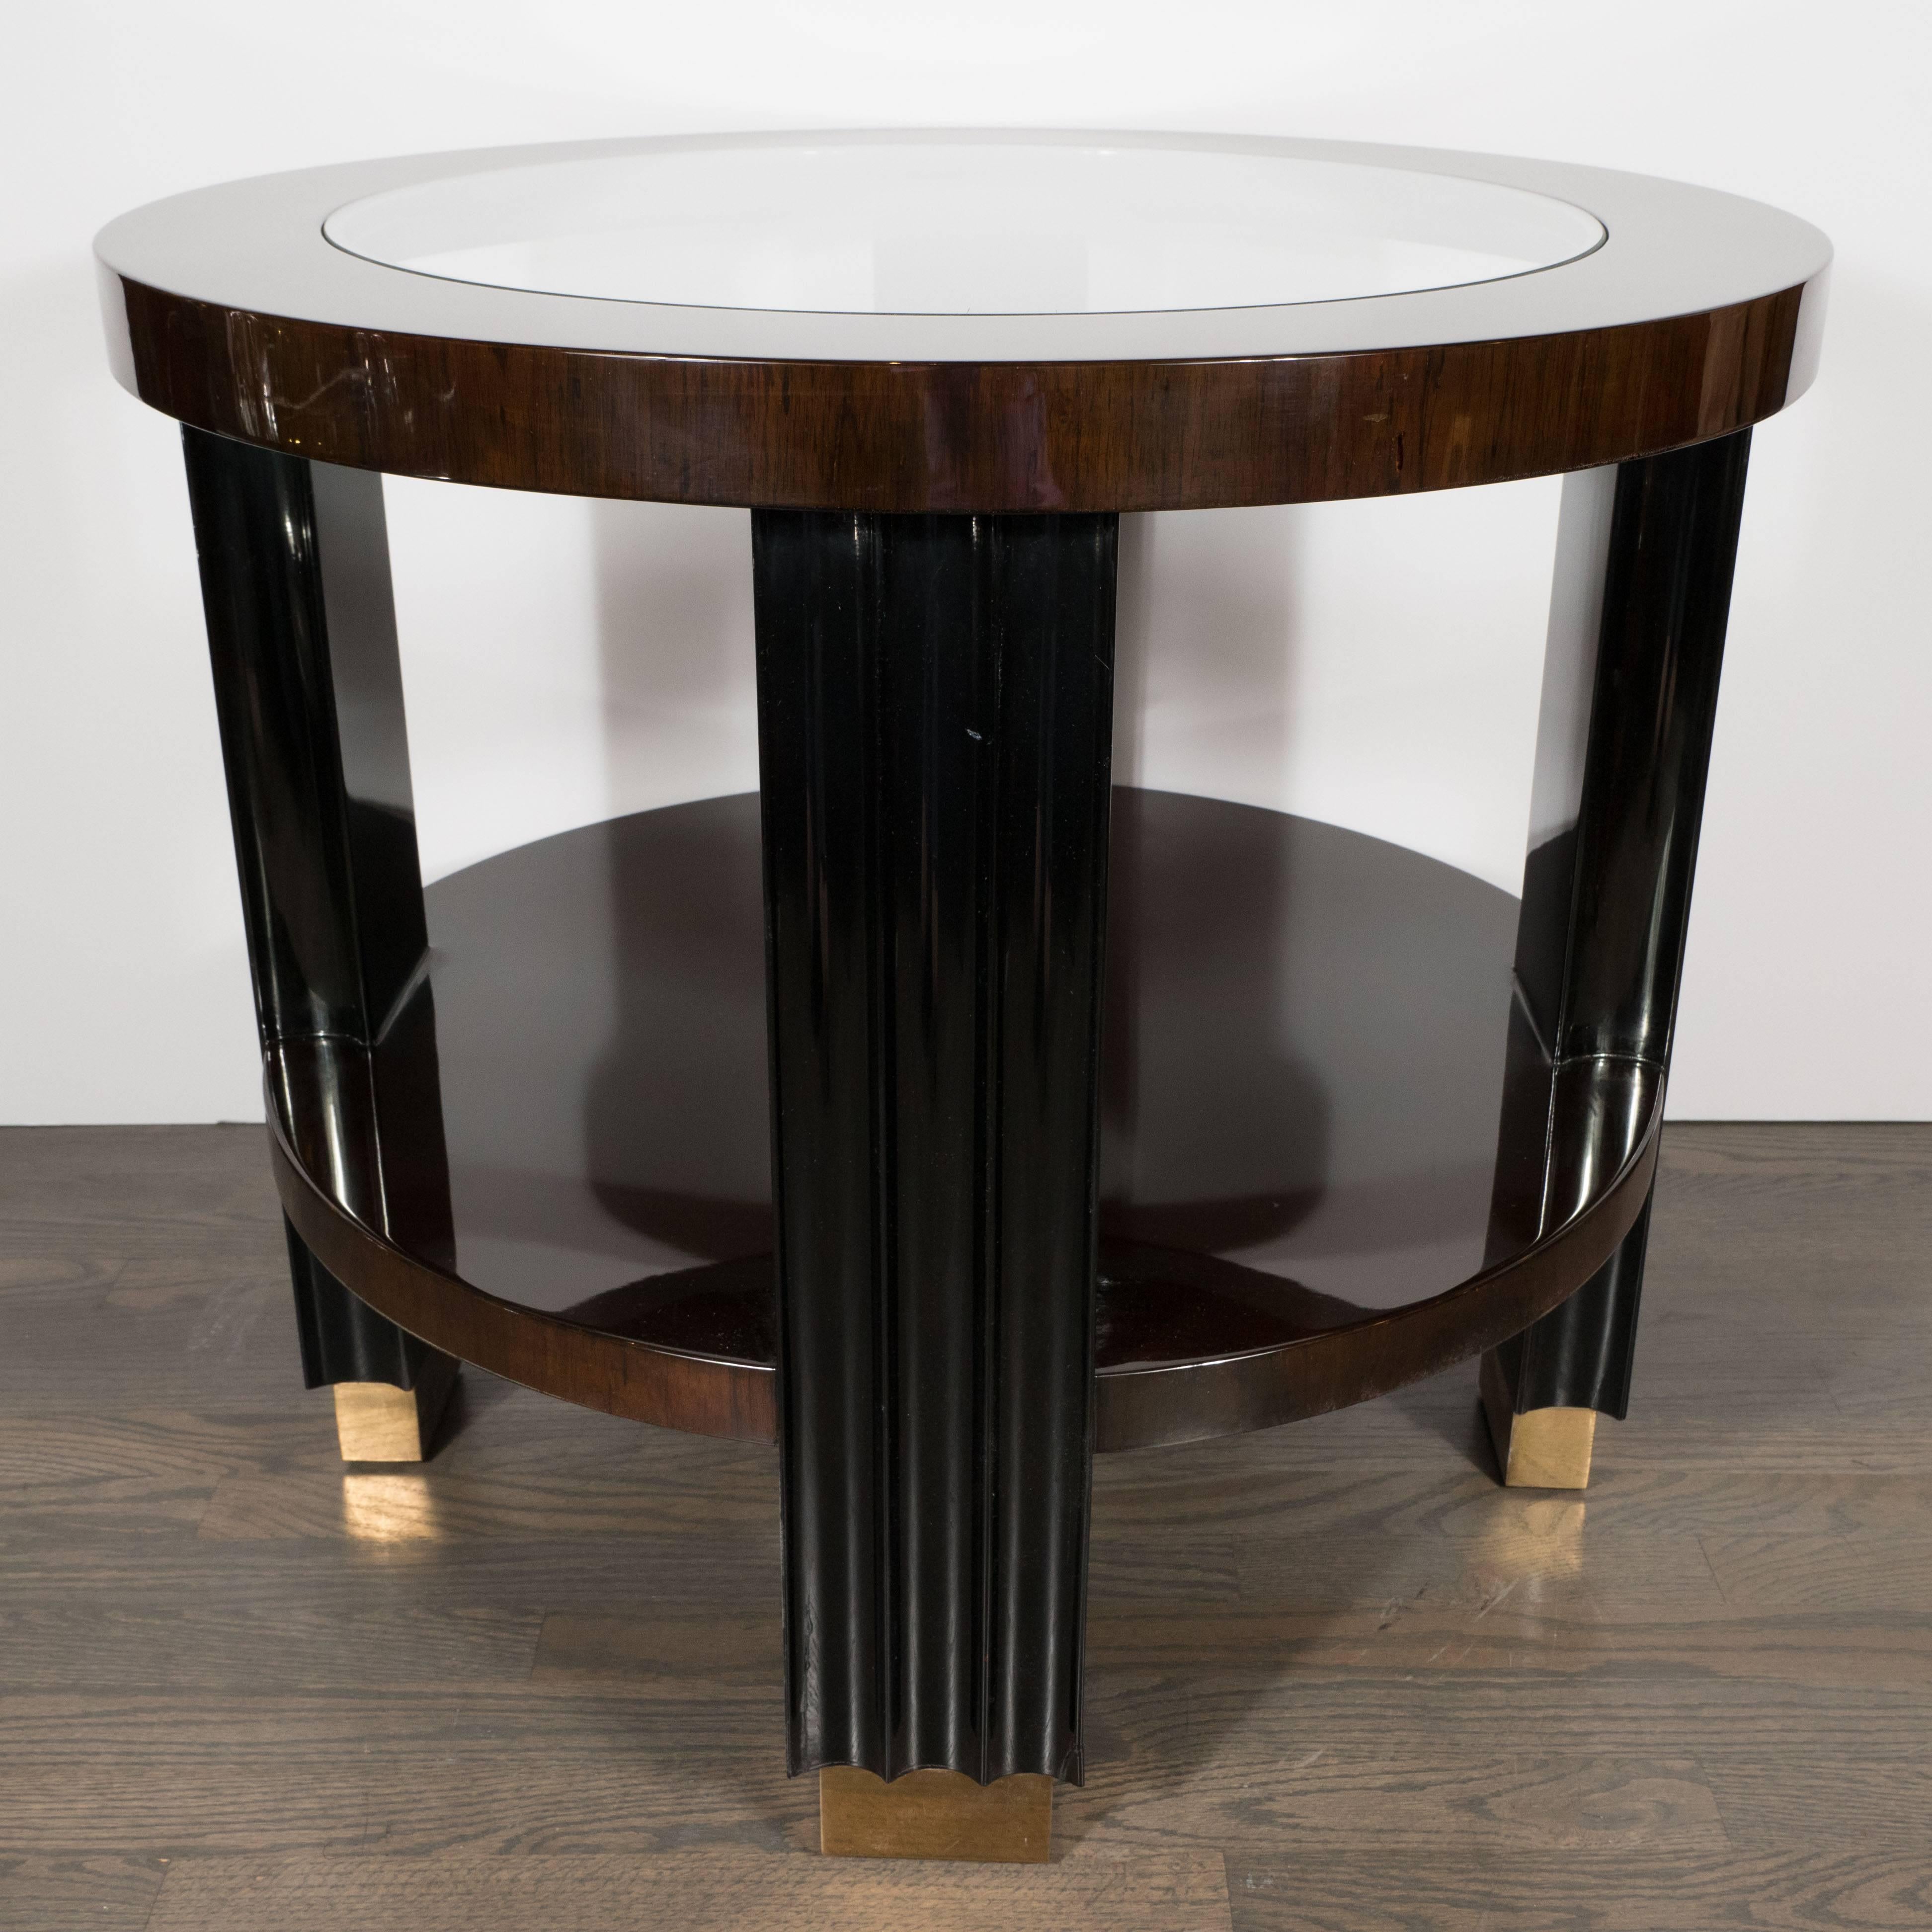 North American Art Deco Two Tiered Walnut and Black Lacquer Occasional Table with Brass Sabots